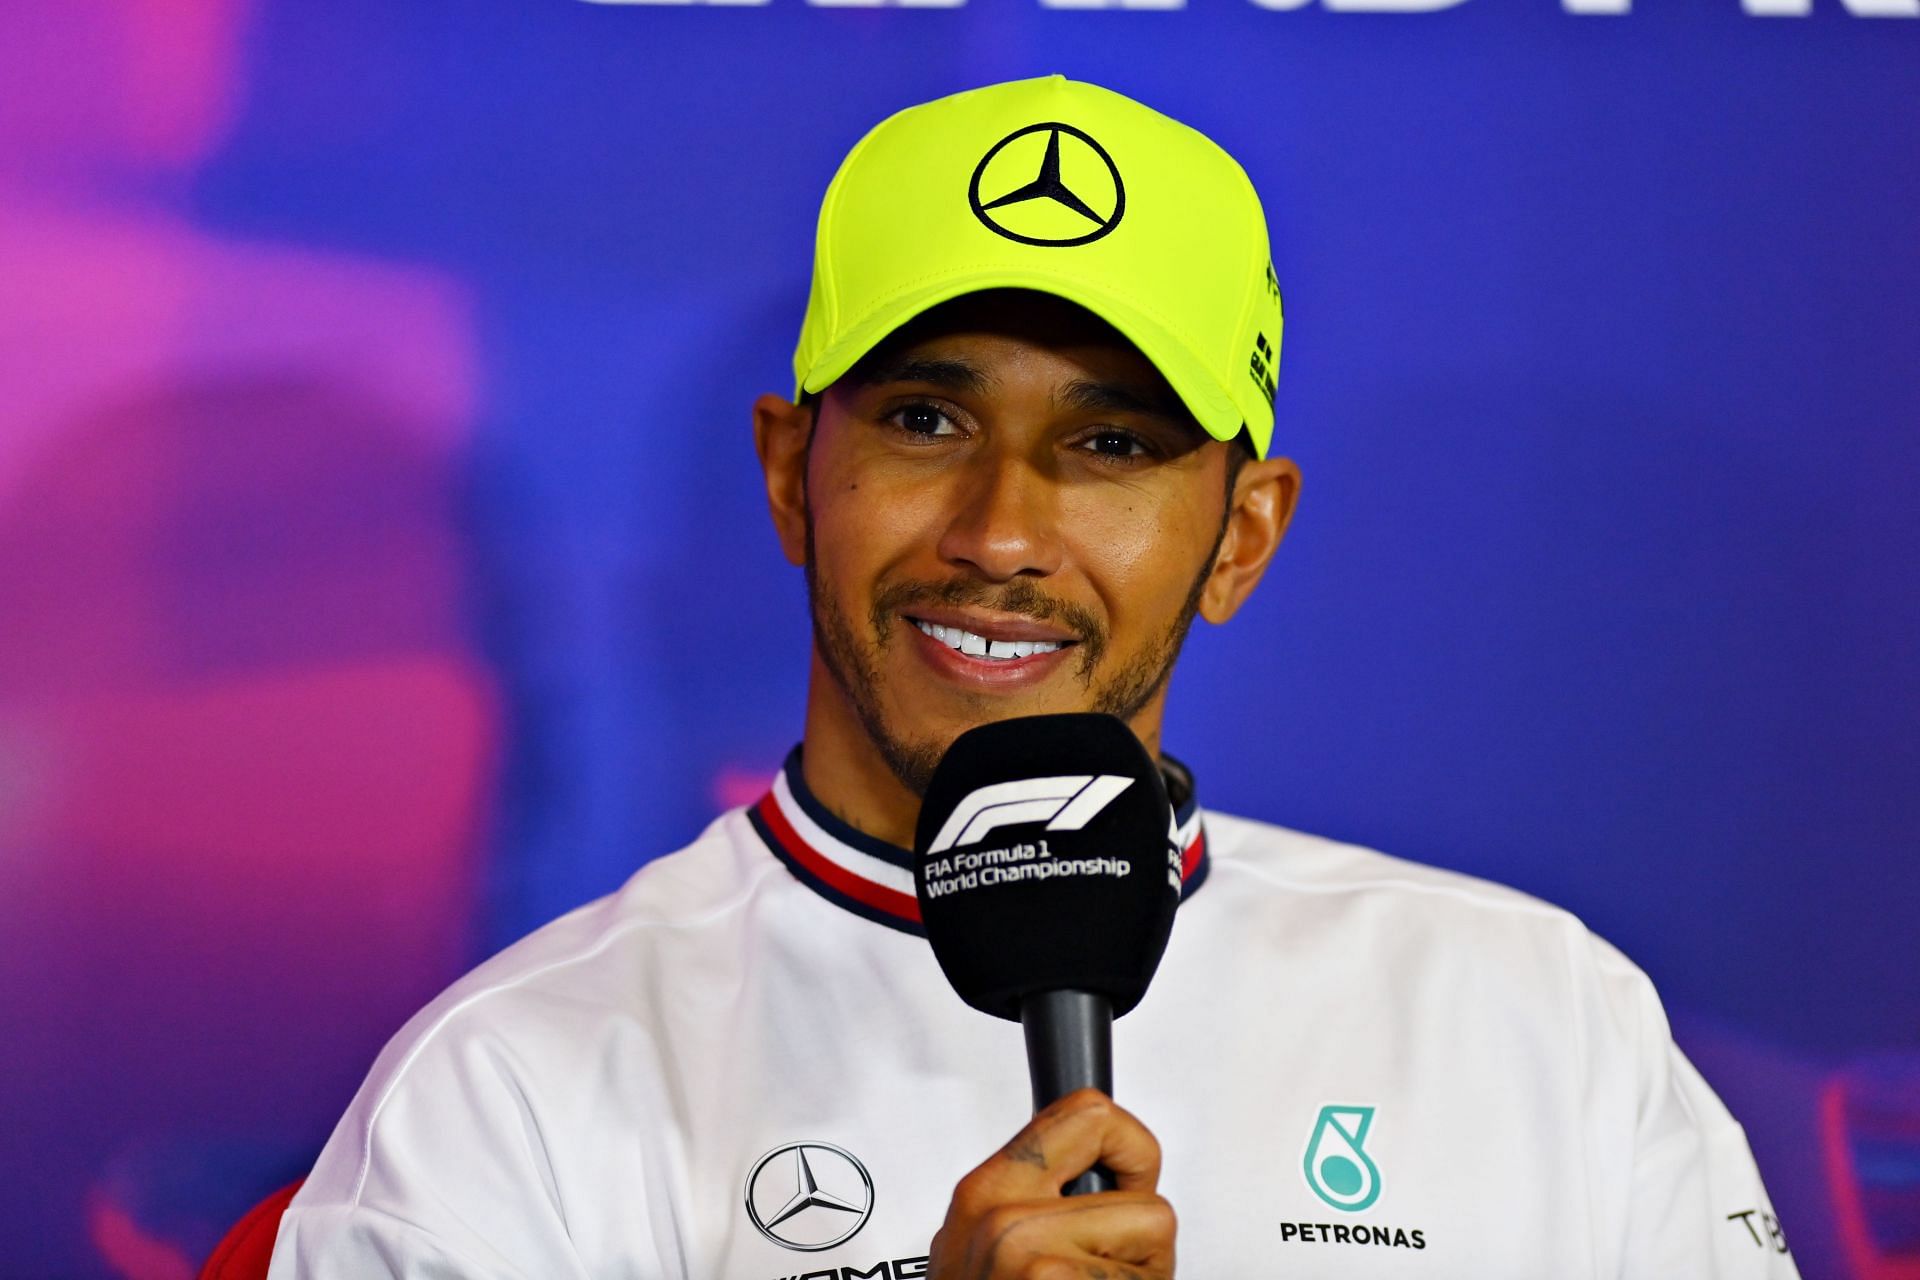 Lewis Hamilton talks in the drivers press conference following the F1 Grand Prix of Great Britain at Silverstone on July 03, 2022 in Northampton, England. (Photo by Dan Mullan/Getty Images)